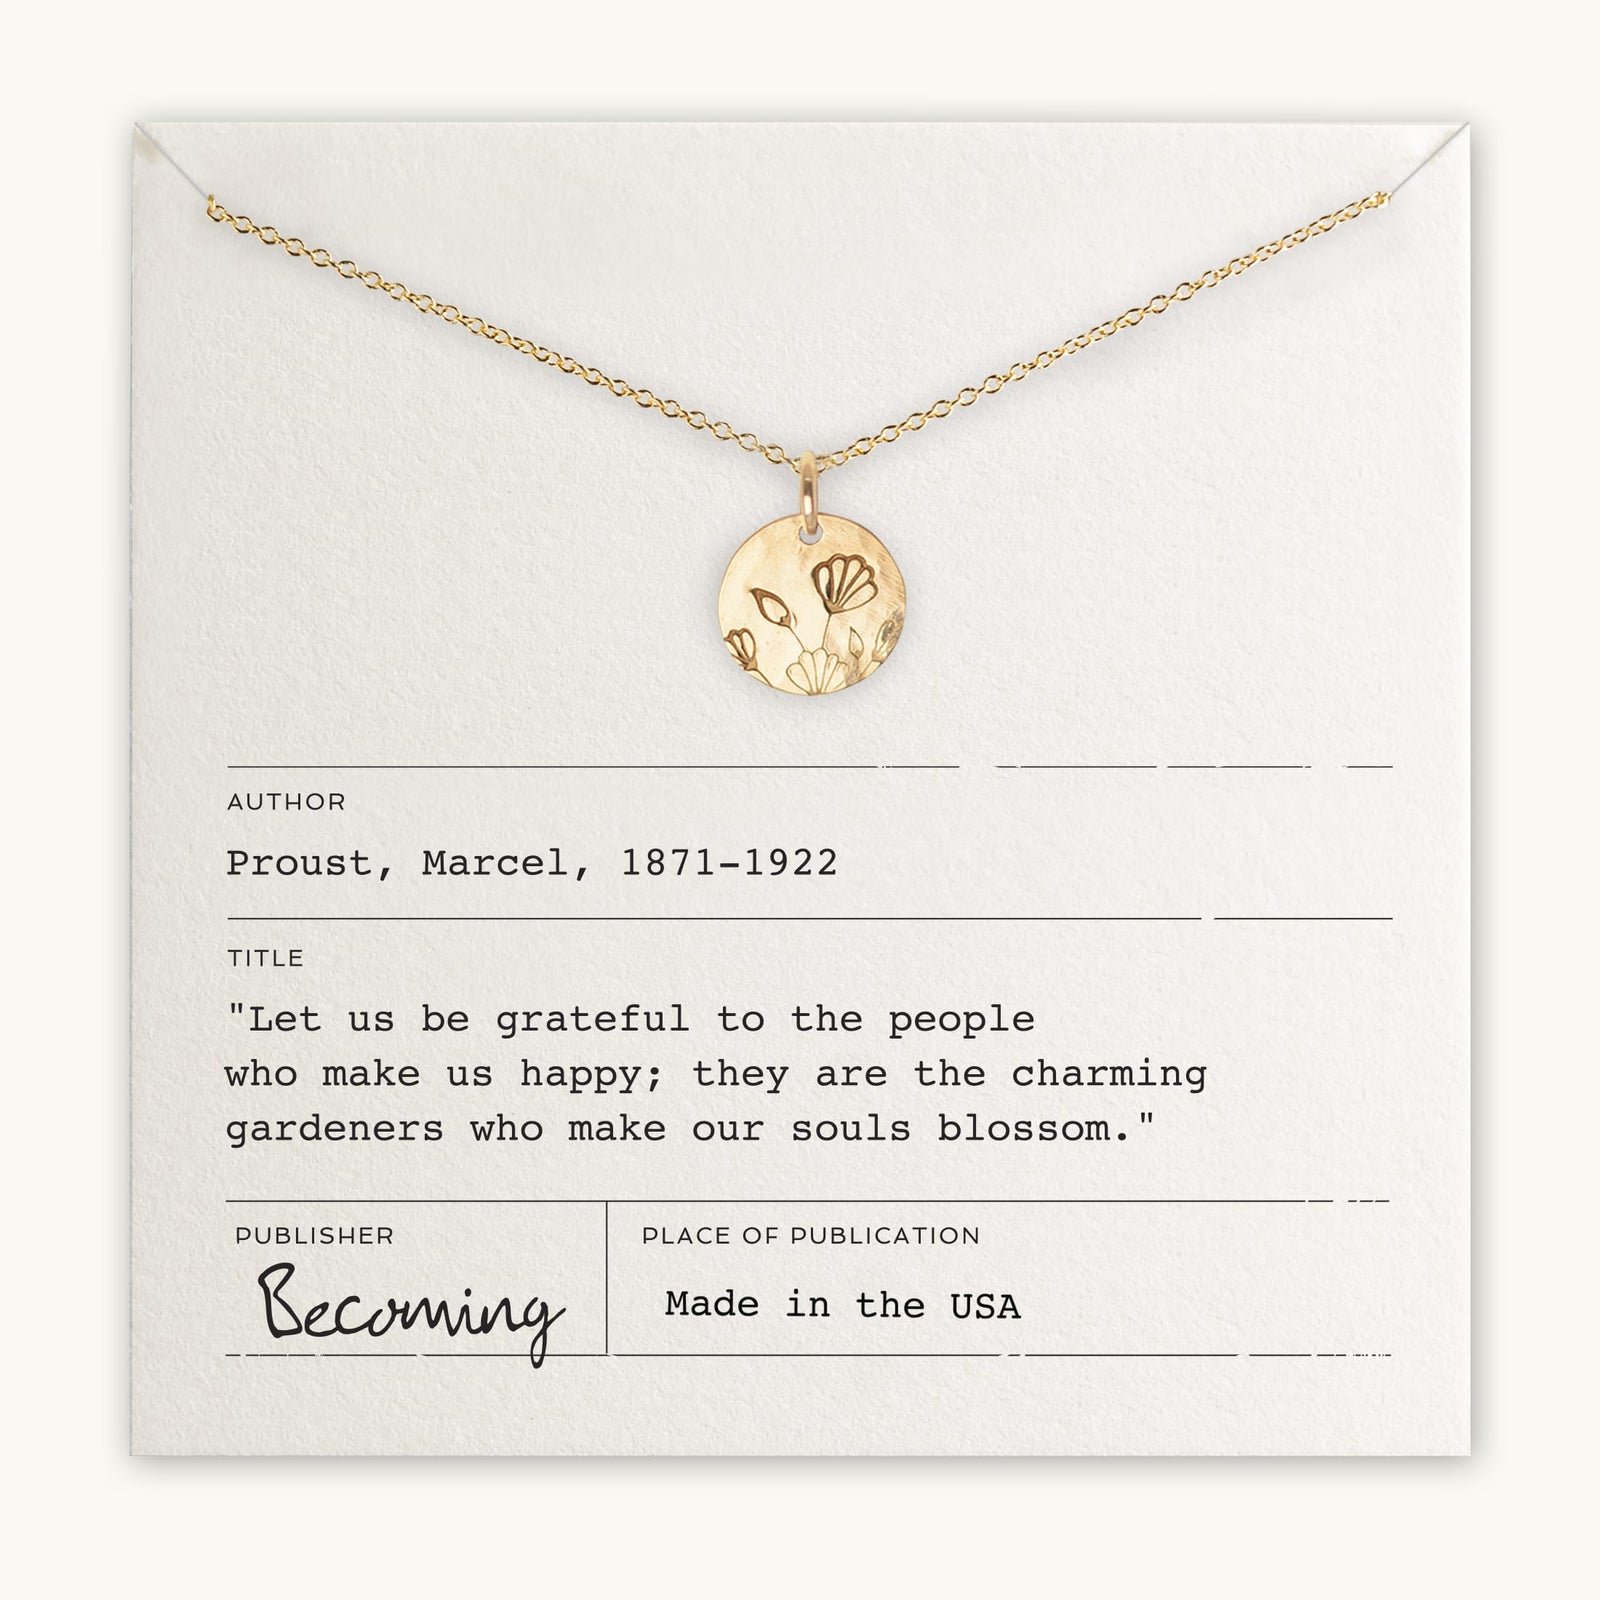 Becoming Jewelry's Blossom Necklace with a pendant displayed on a card featuring a quote by Marcel Proust about gratitude and happiness.